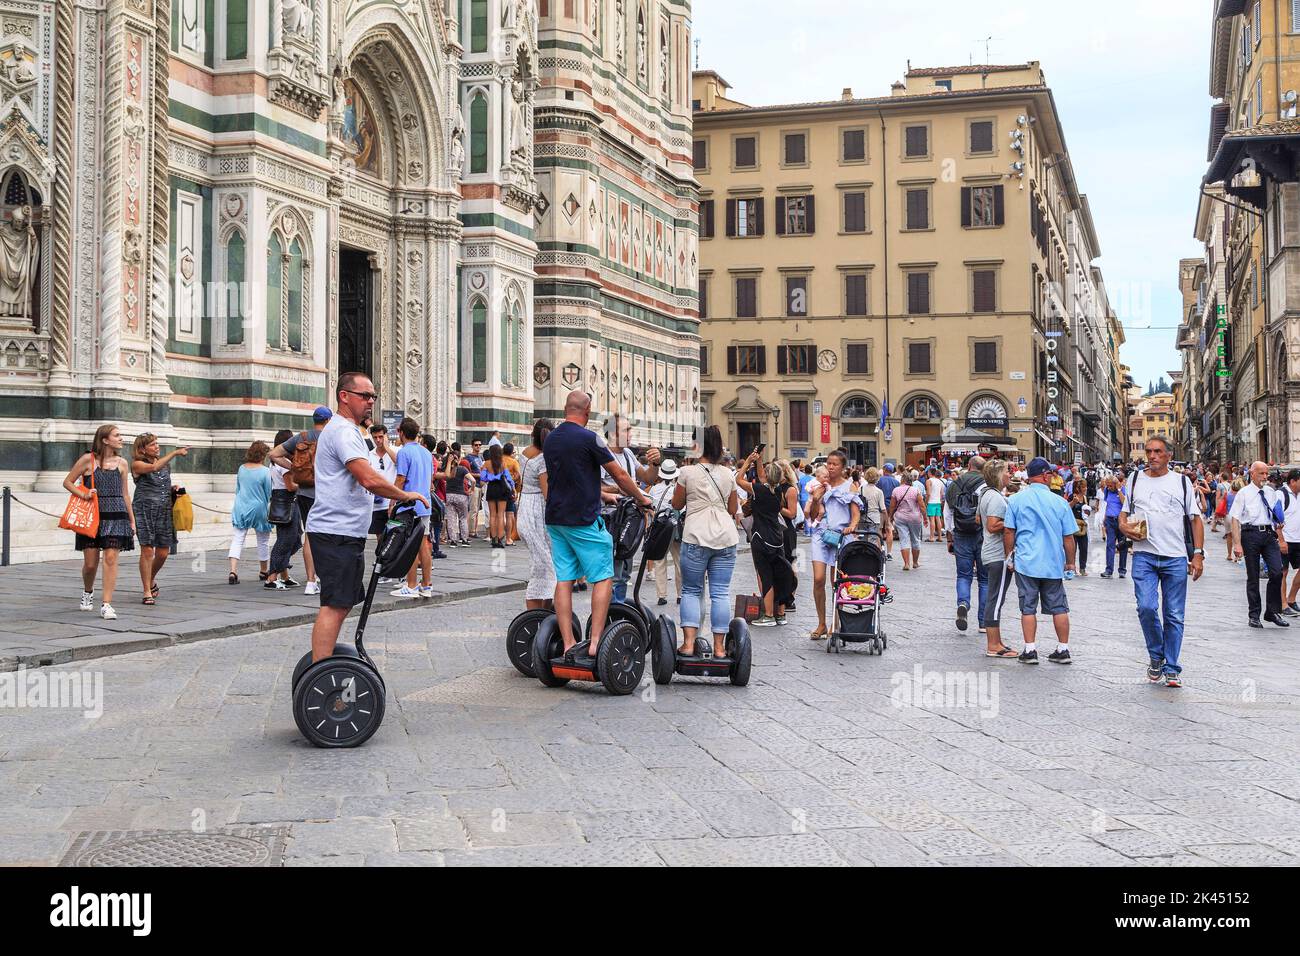 FLORENCE, ITALY - SEPTEMBER 12, 2018: These are unidentified tourist on the segway in a mobile tour near the Cathedral of the city. Stock Photo